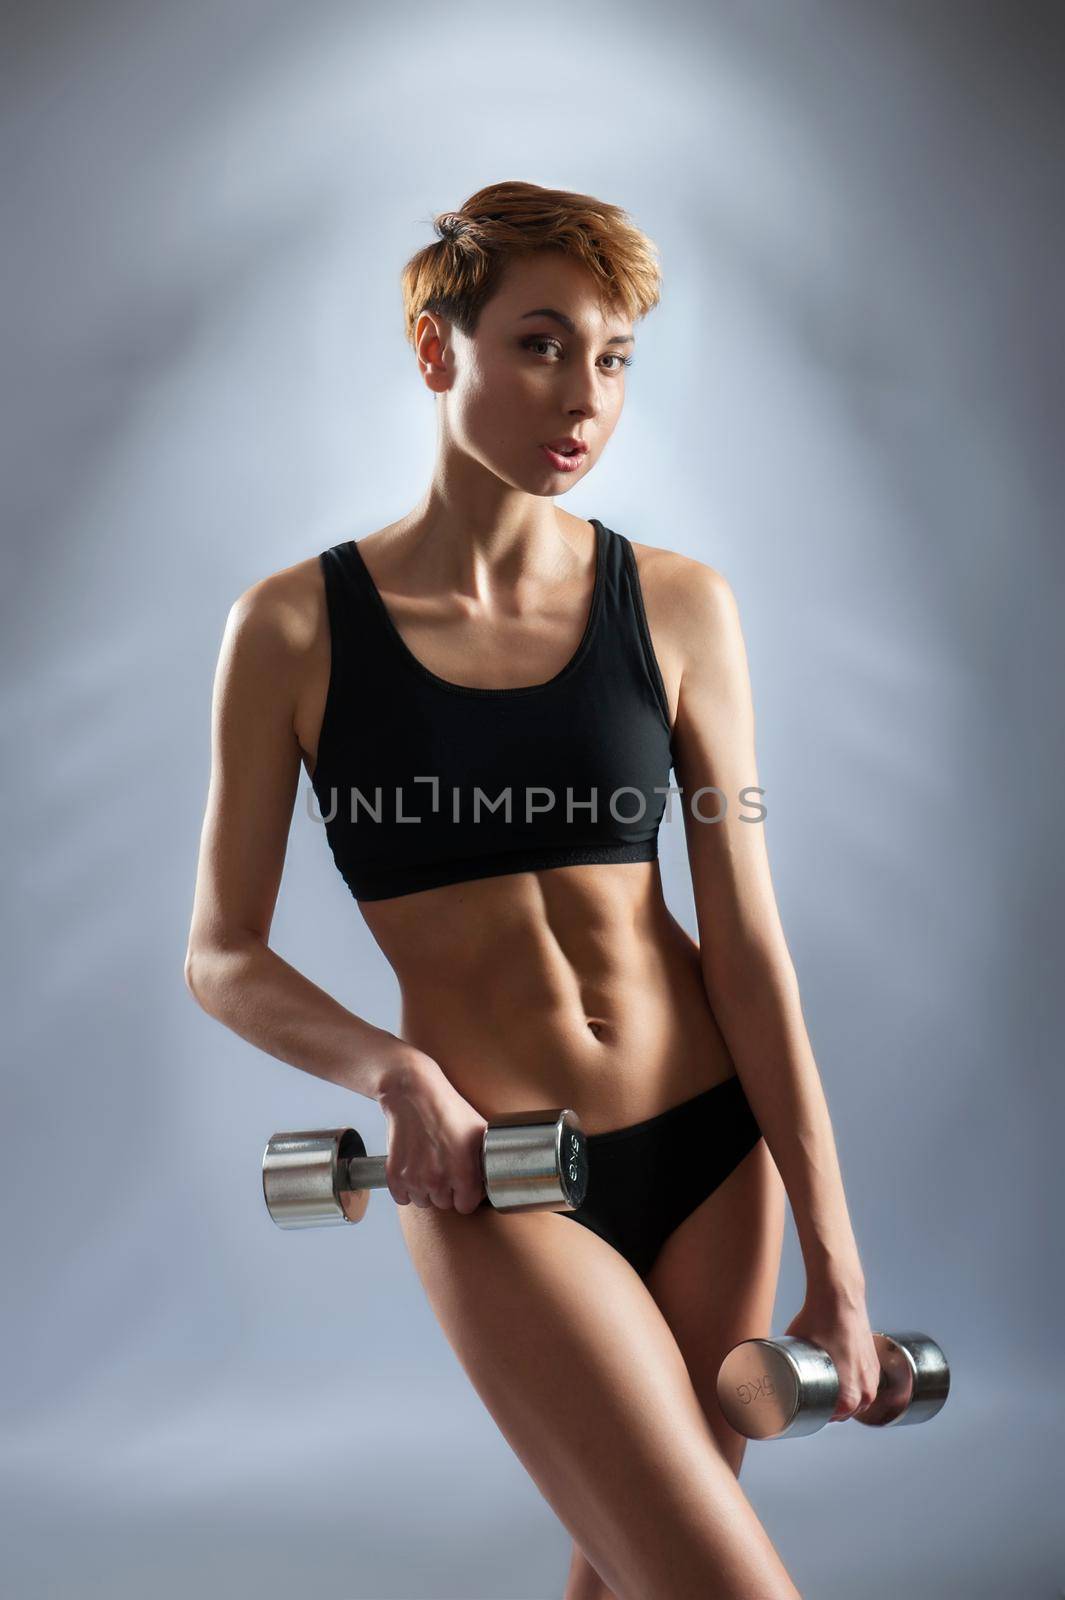 Training routine. Studio portrait of a young short haired fitness woman posing with dumbbells in her hands wearing sport bra and shorts